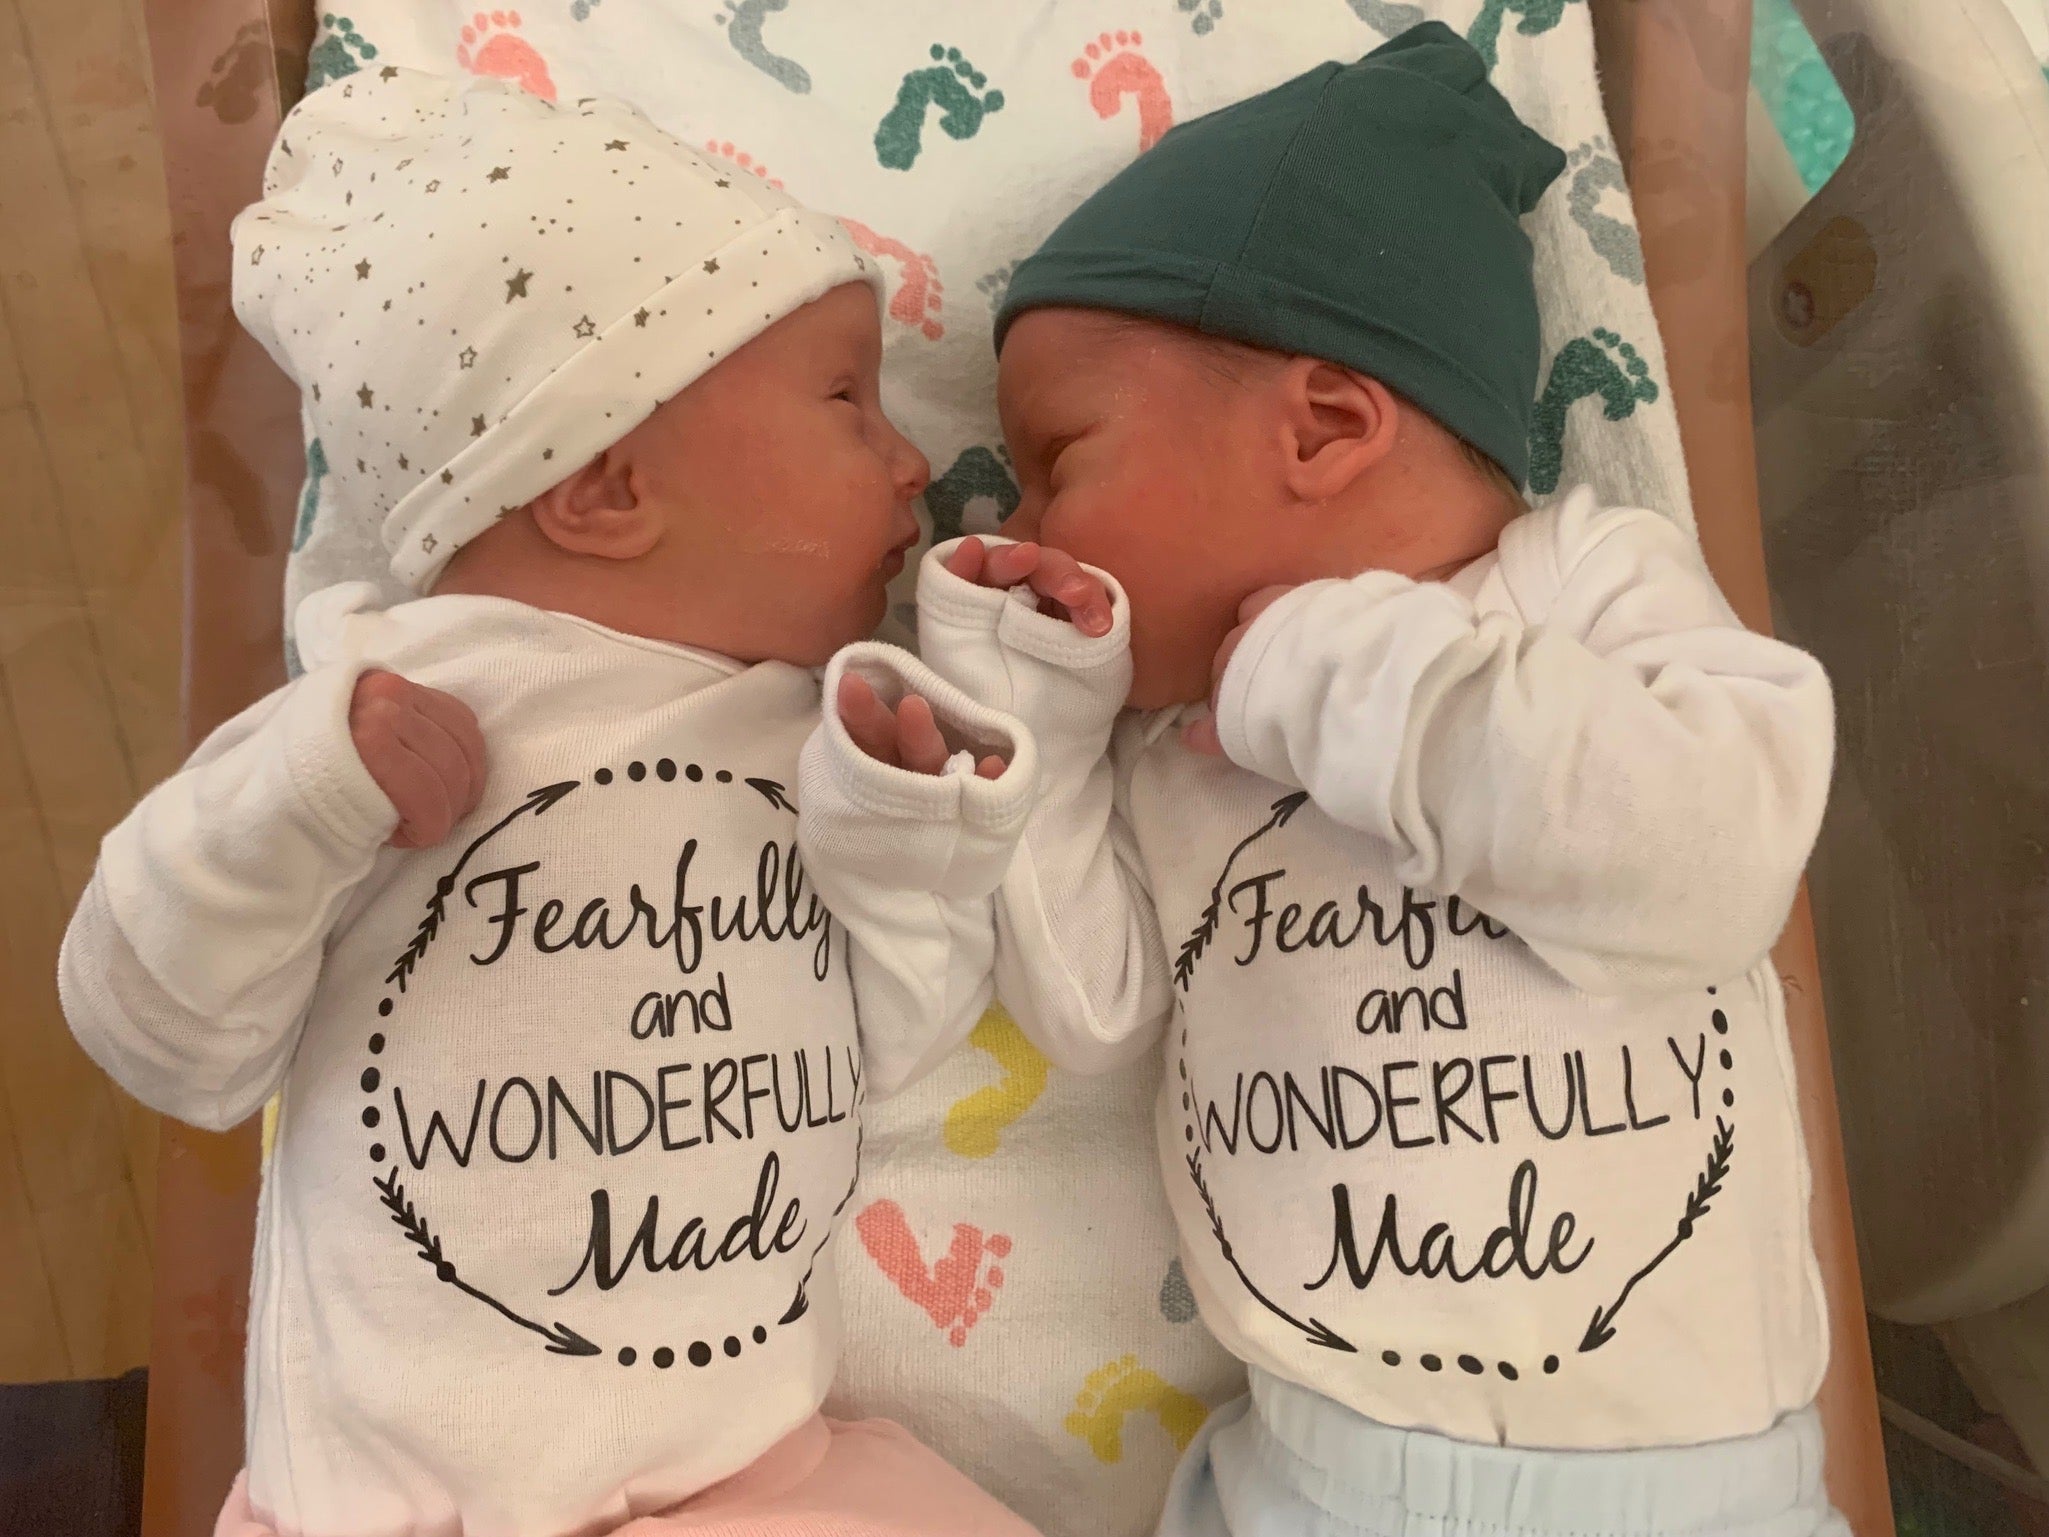 Twins Lydia and Timothy Ridgeway were born on 31 October, 2022 from embryos that were frozen in 1992